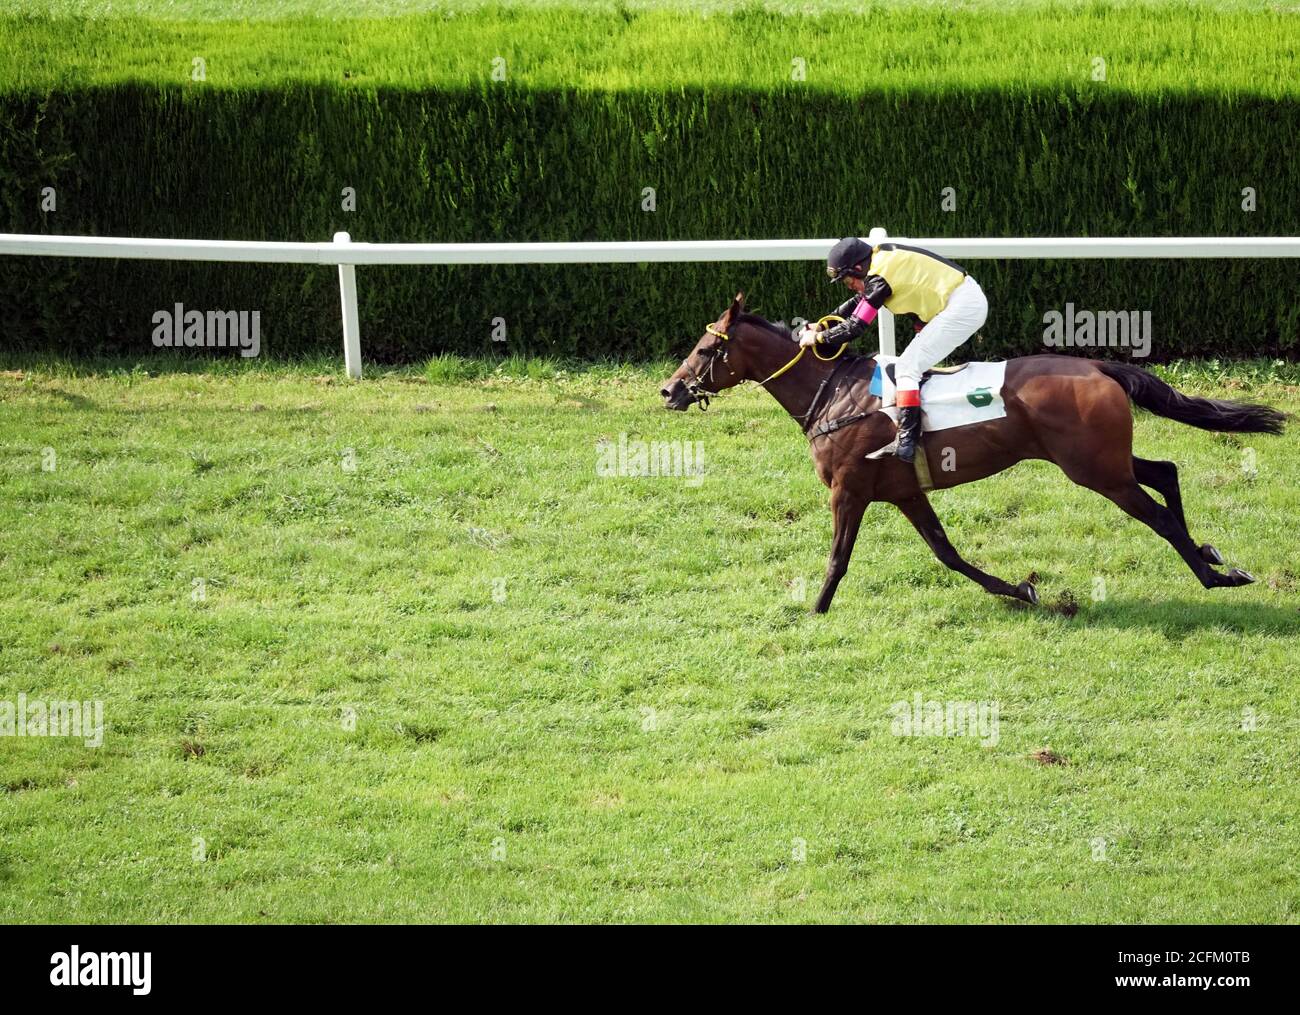 Single horse with a jockey galloping at the race on September 6th of 2020, in Merano, Italy. Stock Photo